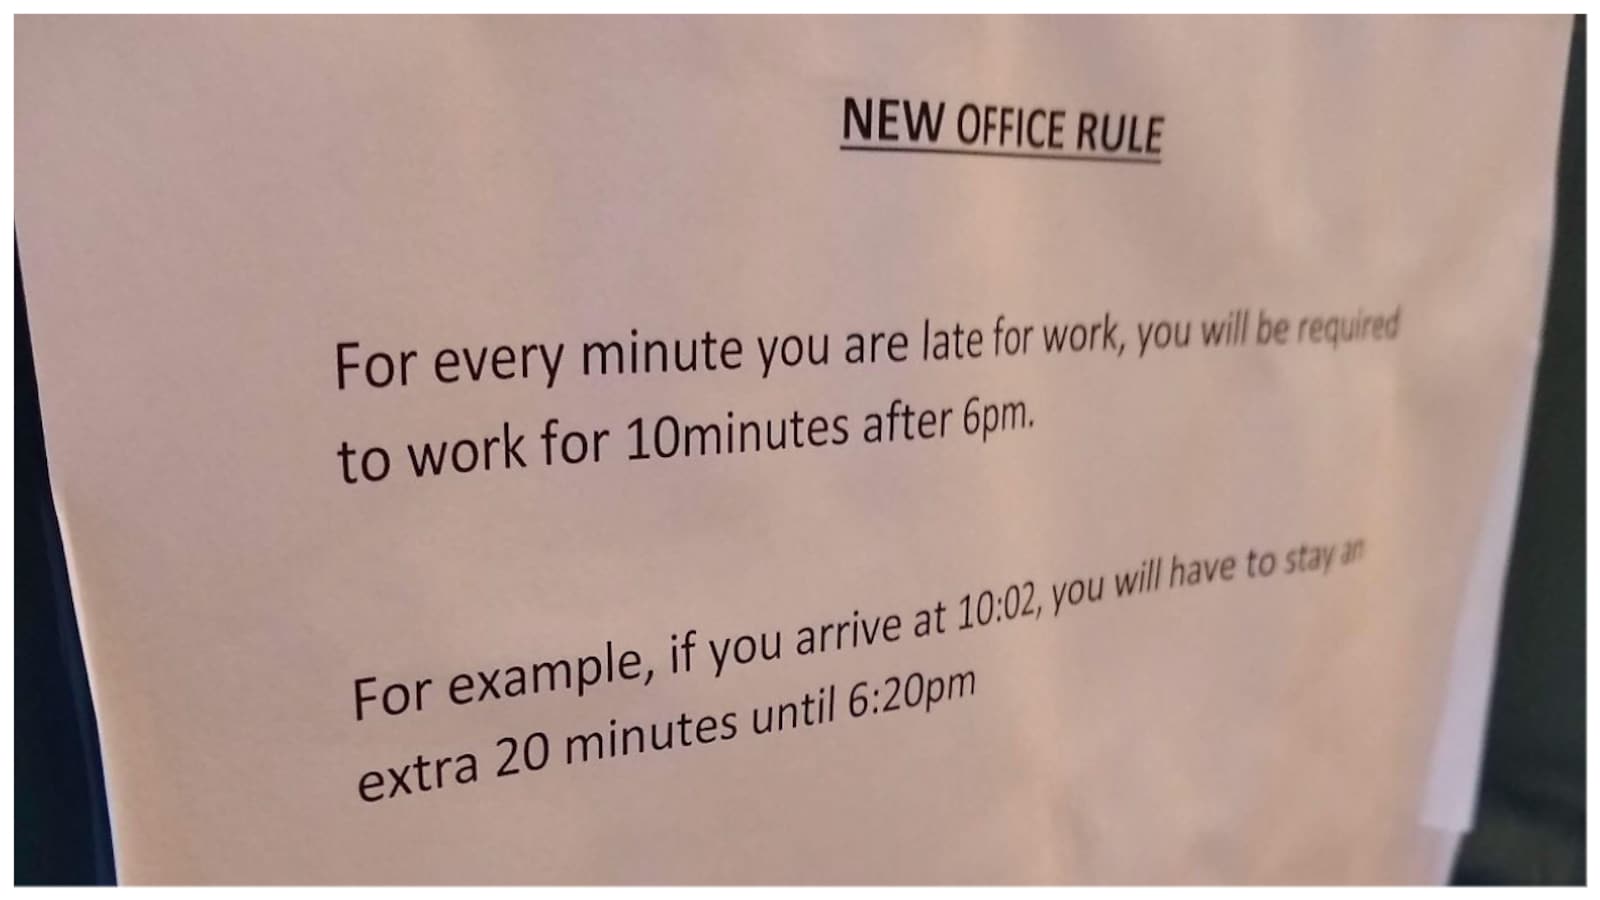 For every minute you're late, you'll have to work 10 minutes extra': Office  rule divides Twitter